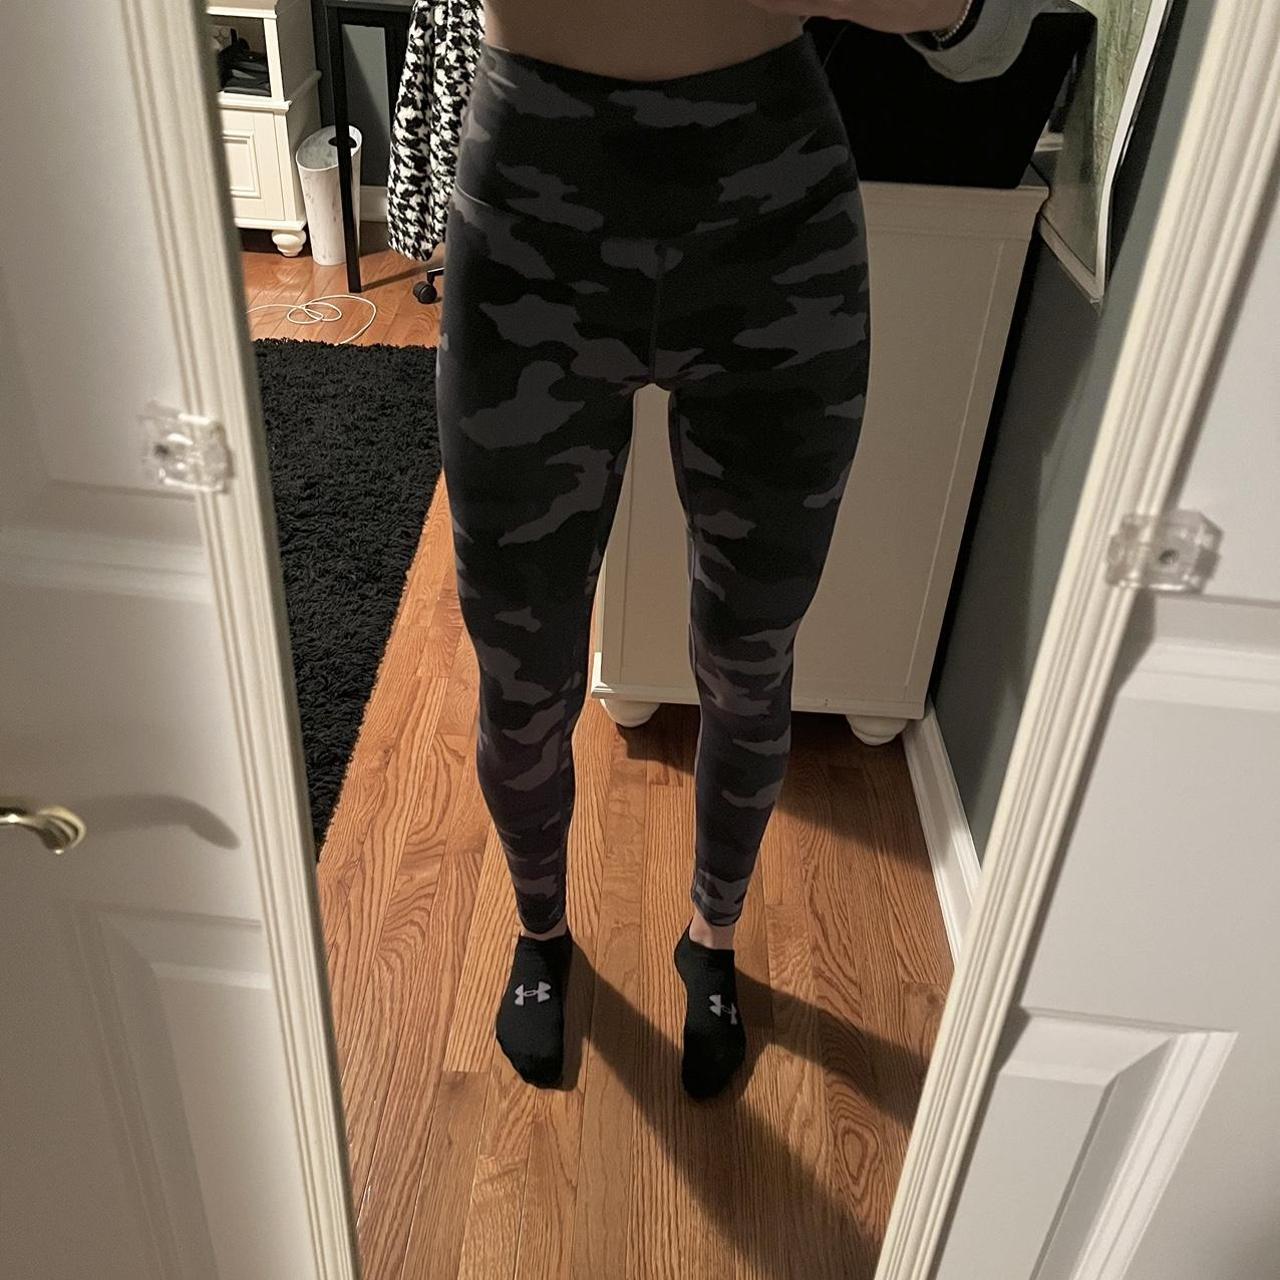 Army printed workout leggings Super cute and comfy - Depop